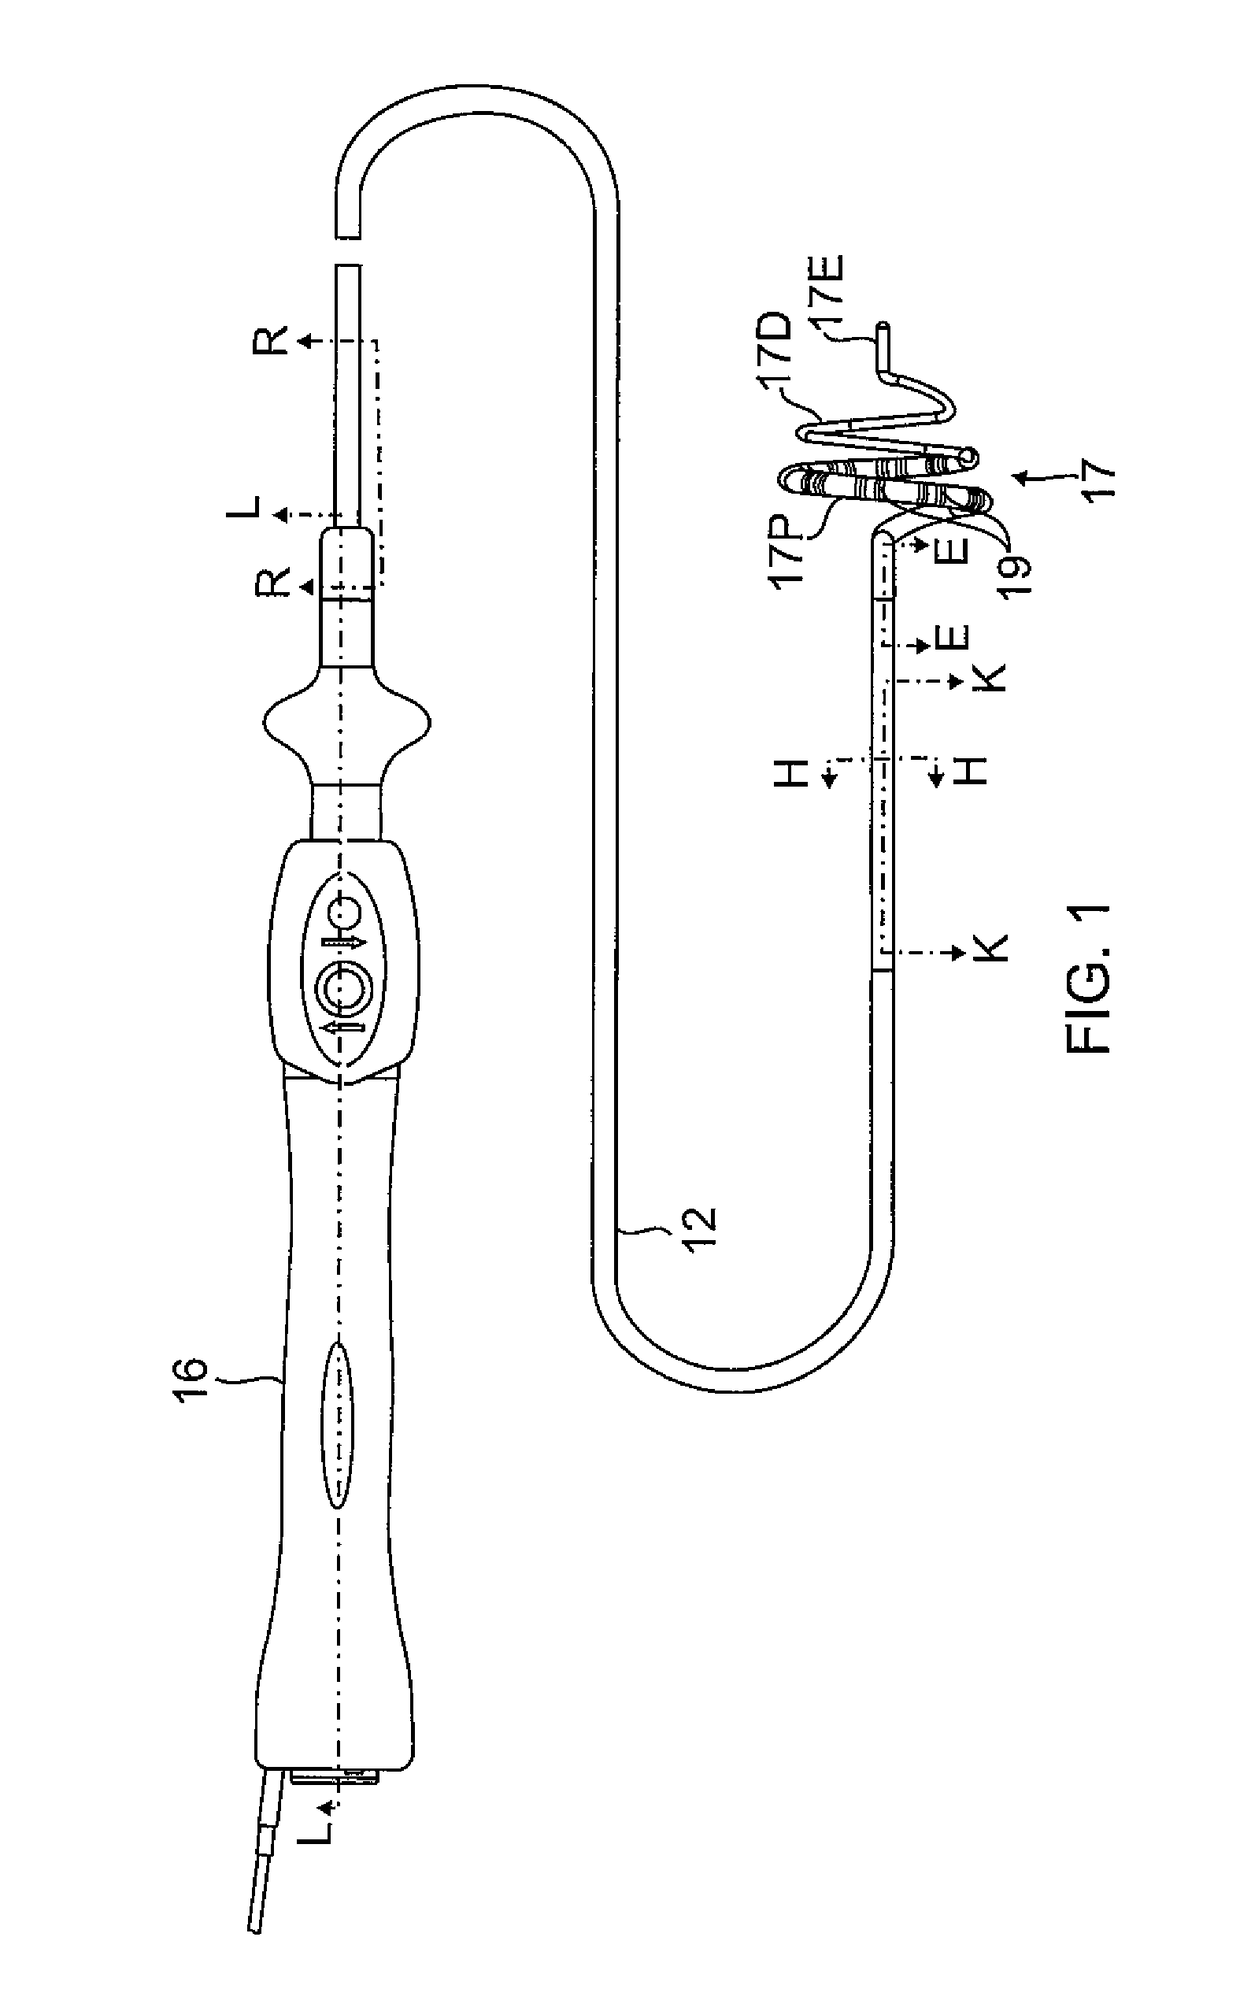 Catheter with soft distal tip for mapping and ablating tubular region